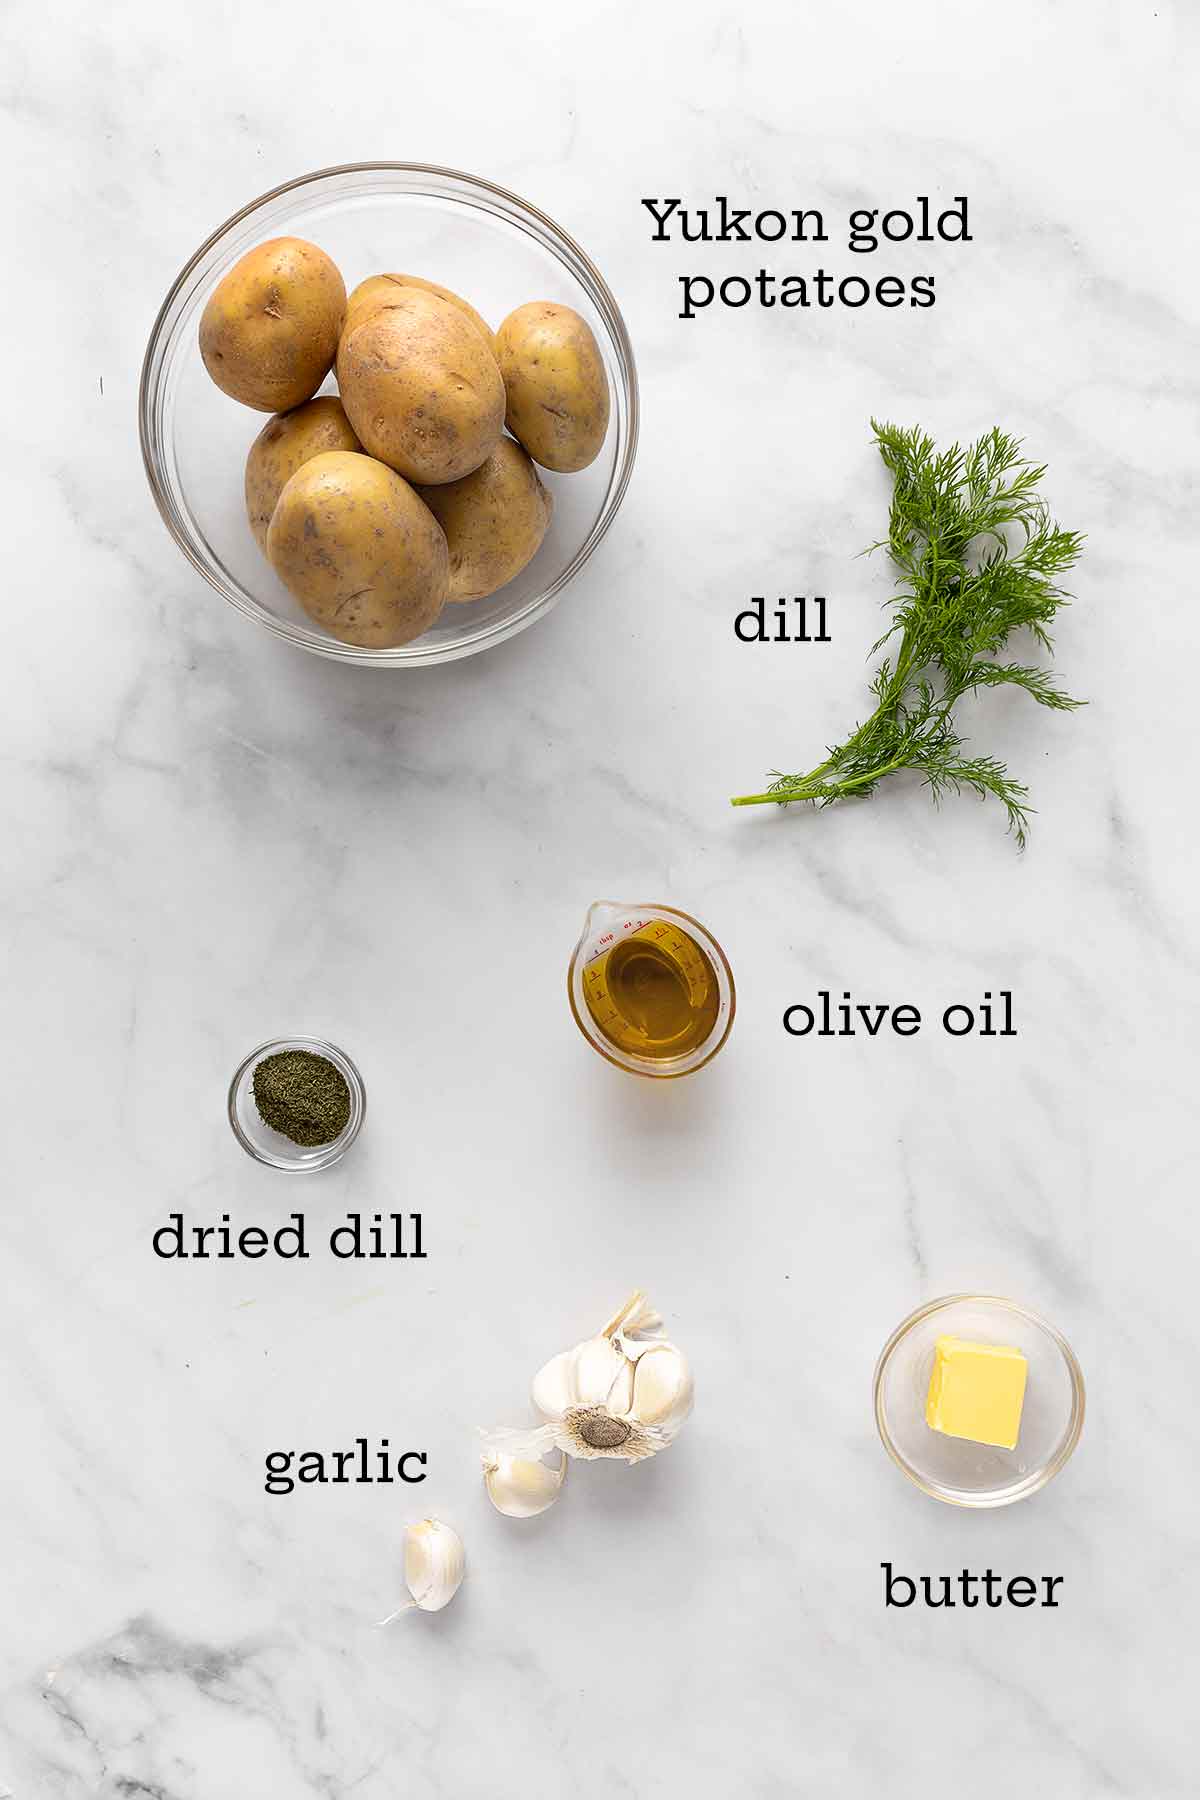 Ingredients for roasted potatoes with dill--Yukon gold potatoes, fresh and dried dill, olive oil, butter, and garlic.